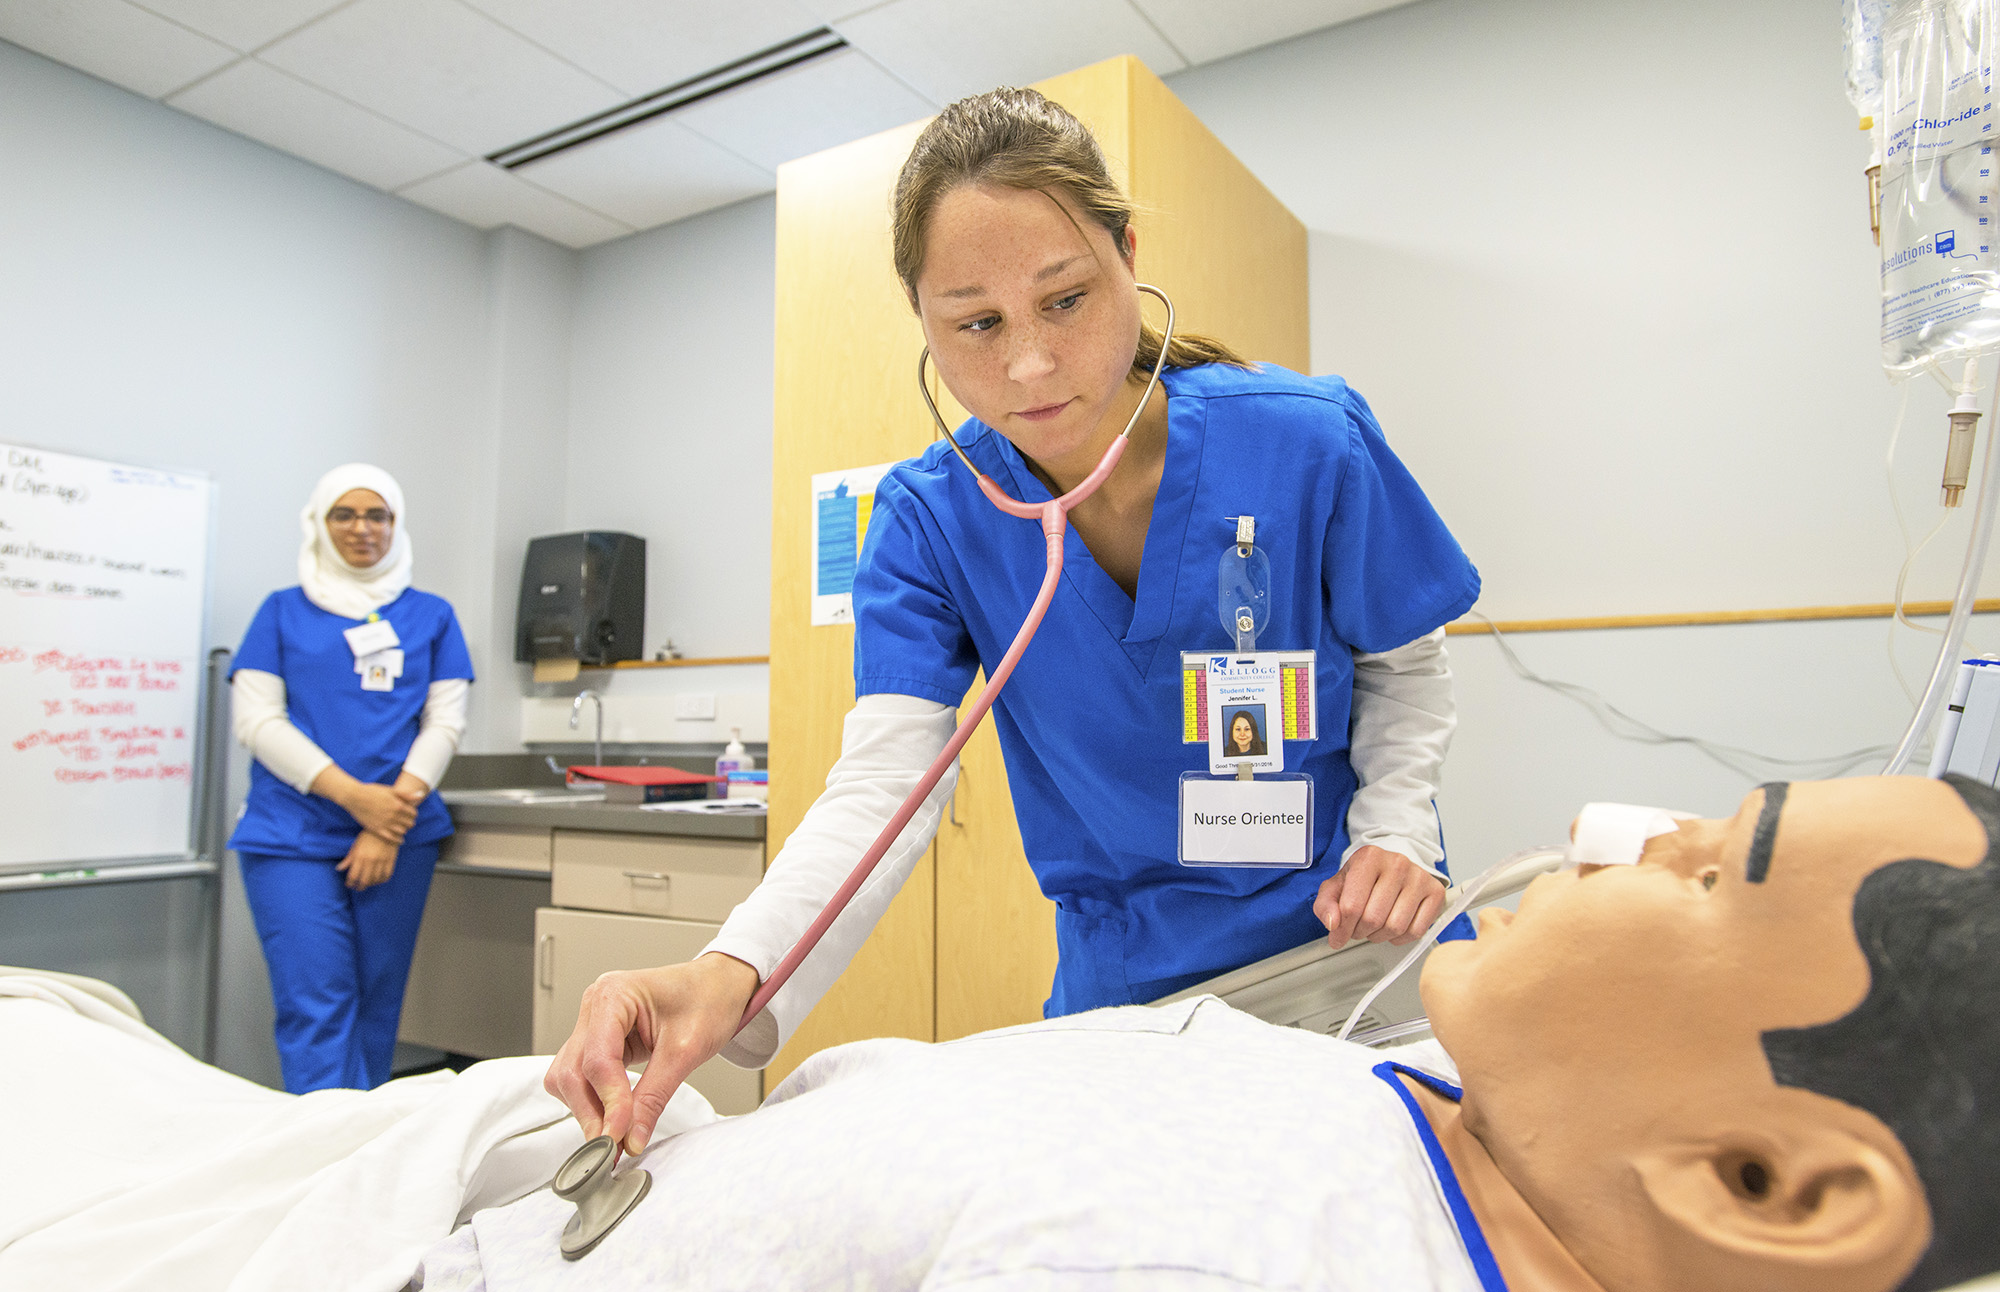 KCC Nursing students work with a patient simulator in a Nursing Lab on campus.